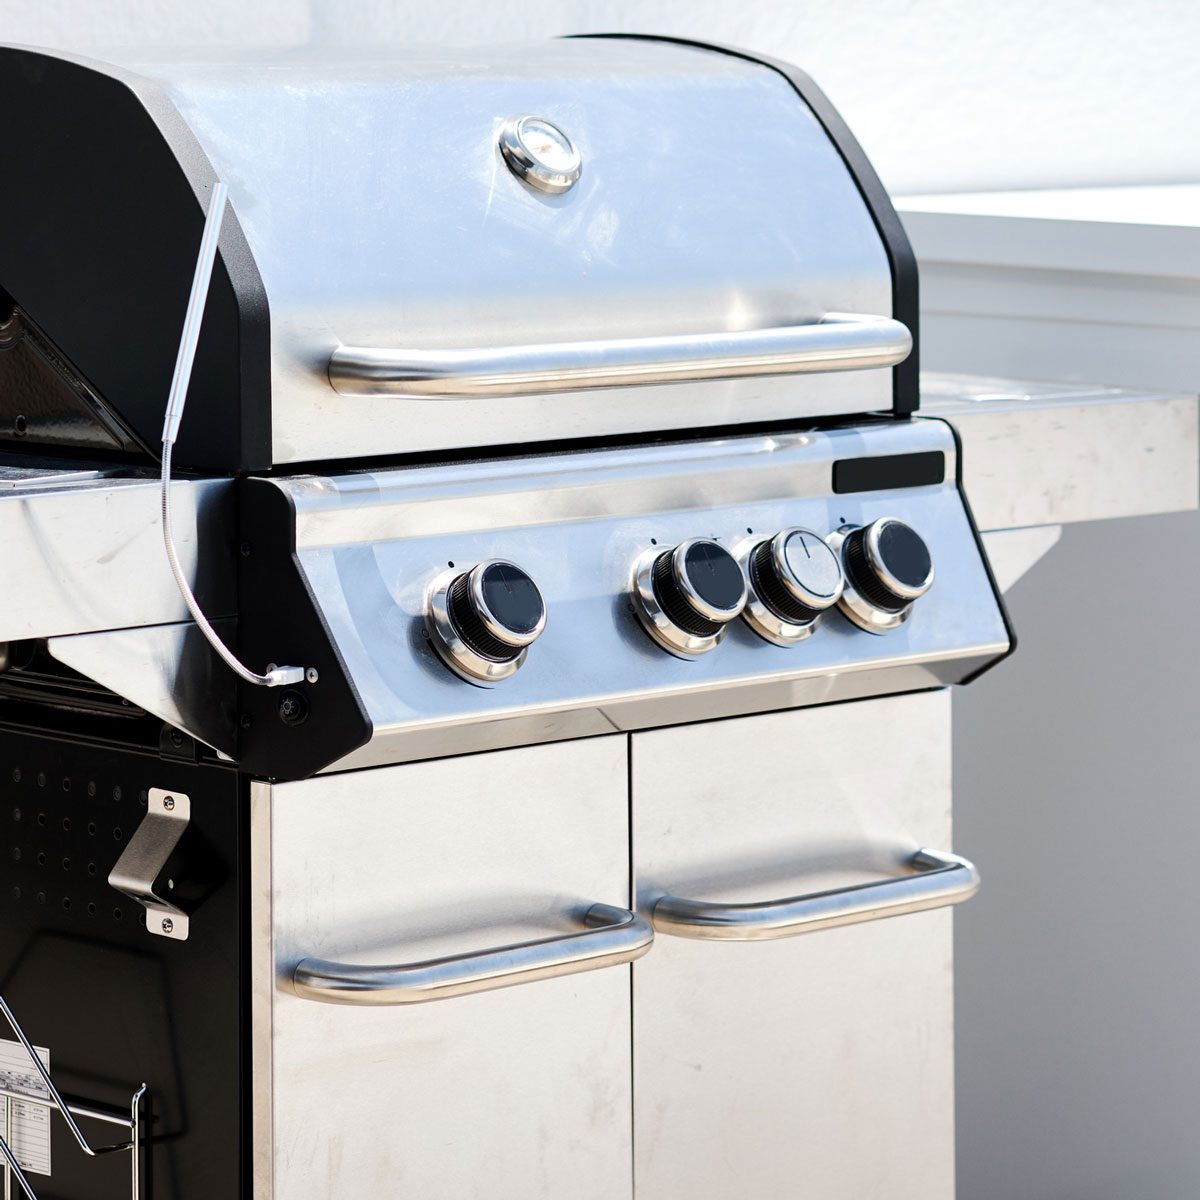 What Are the Different Parts of a Gas Grill?